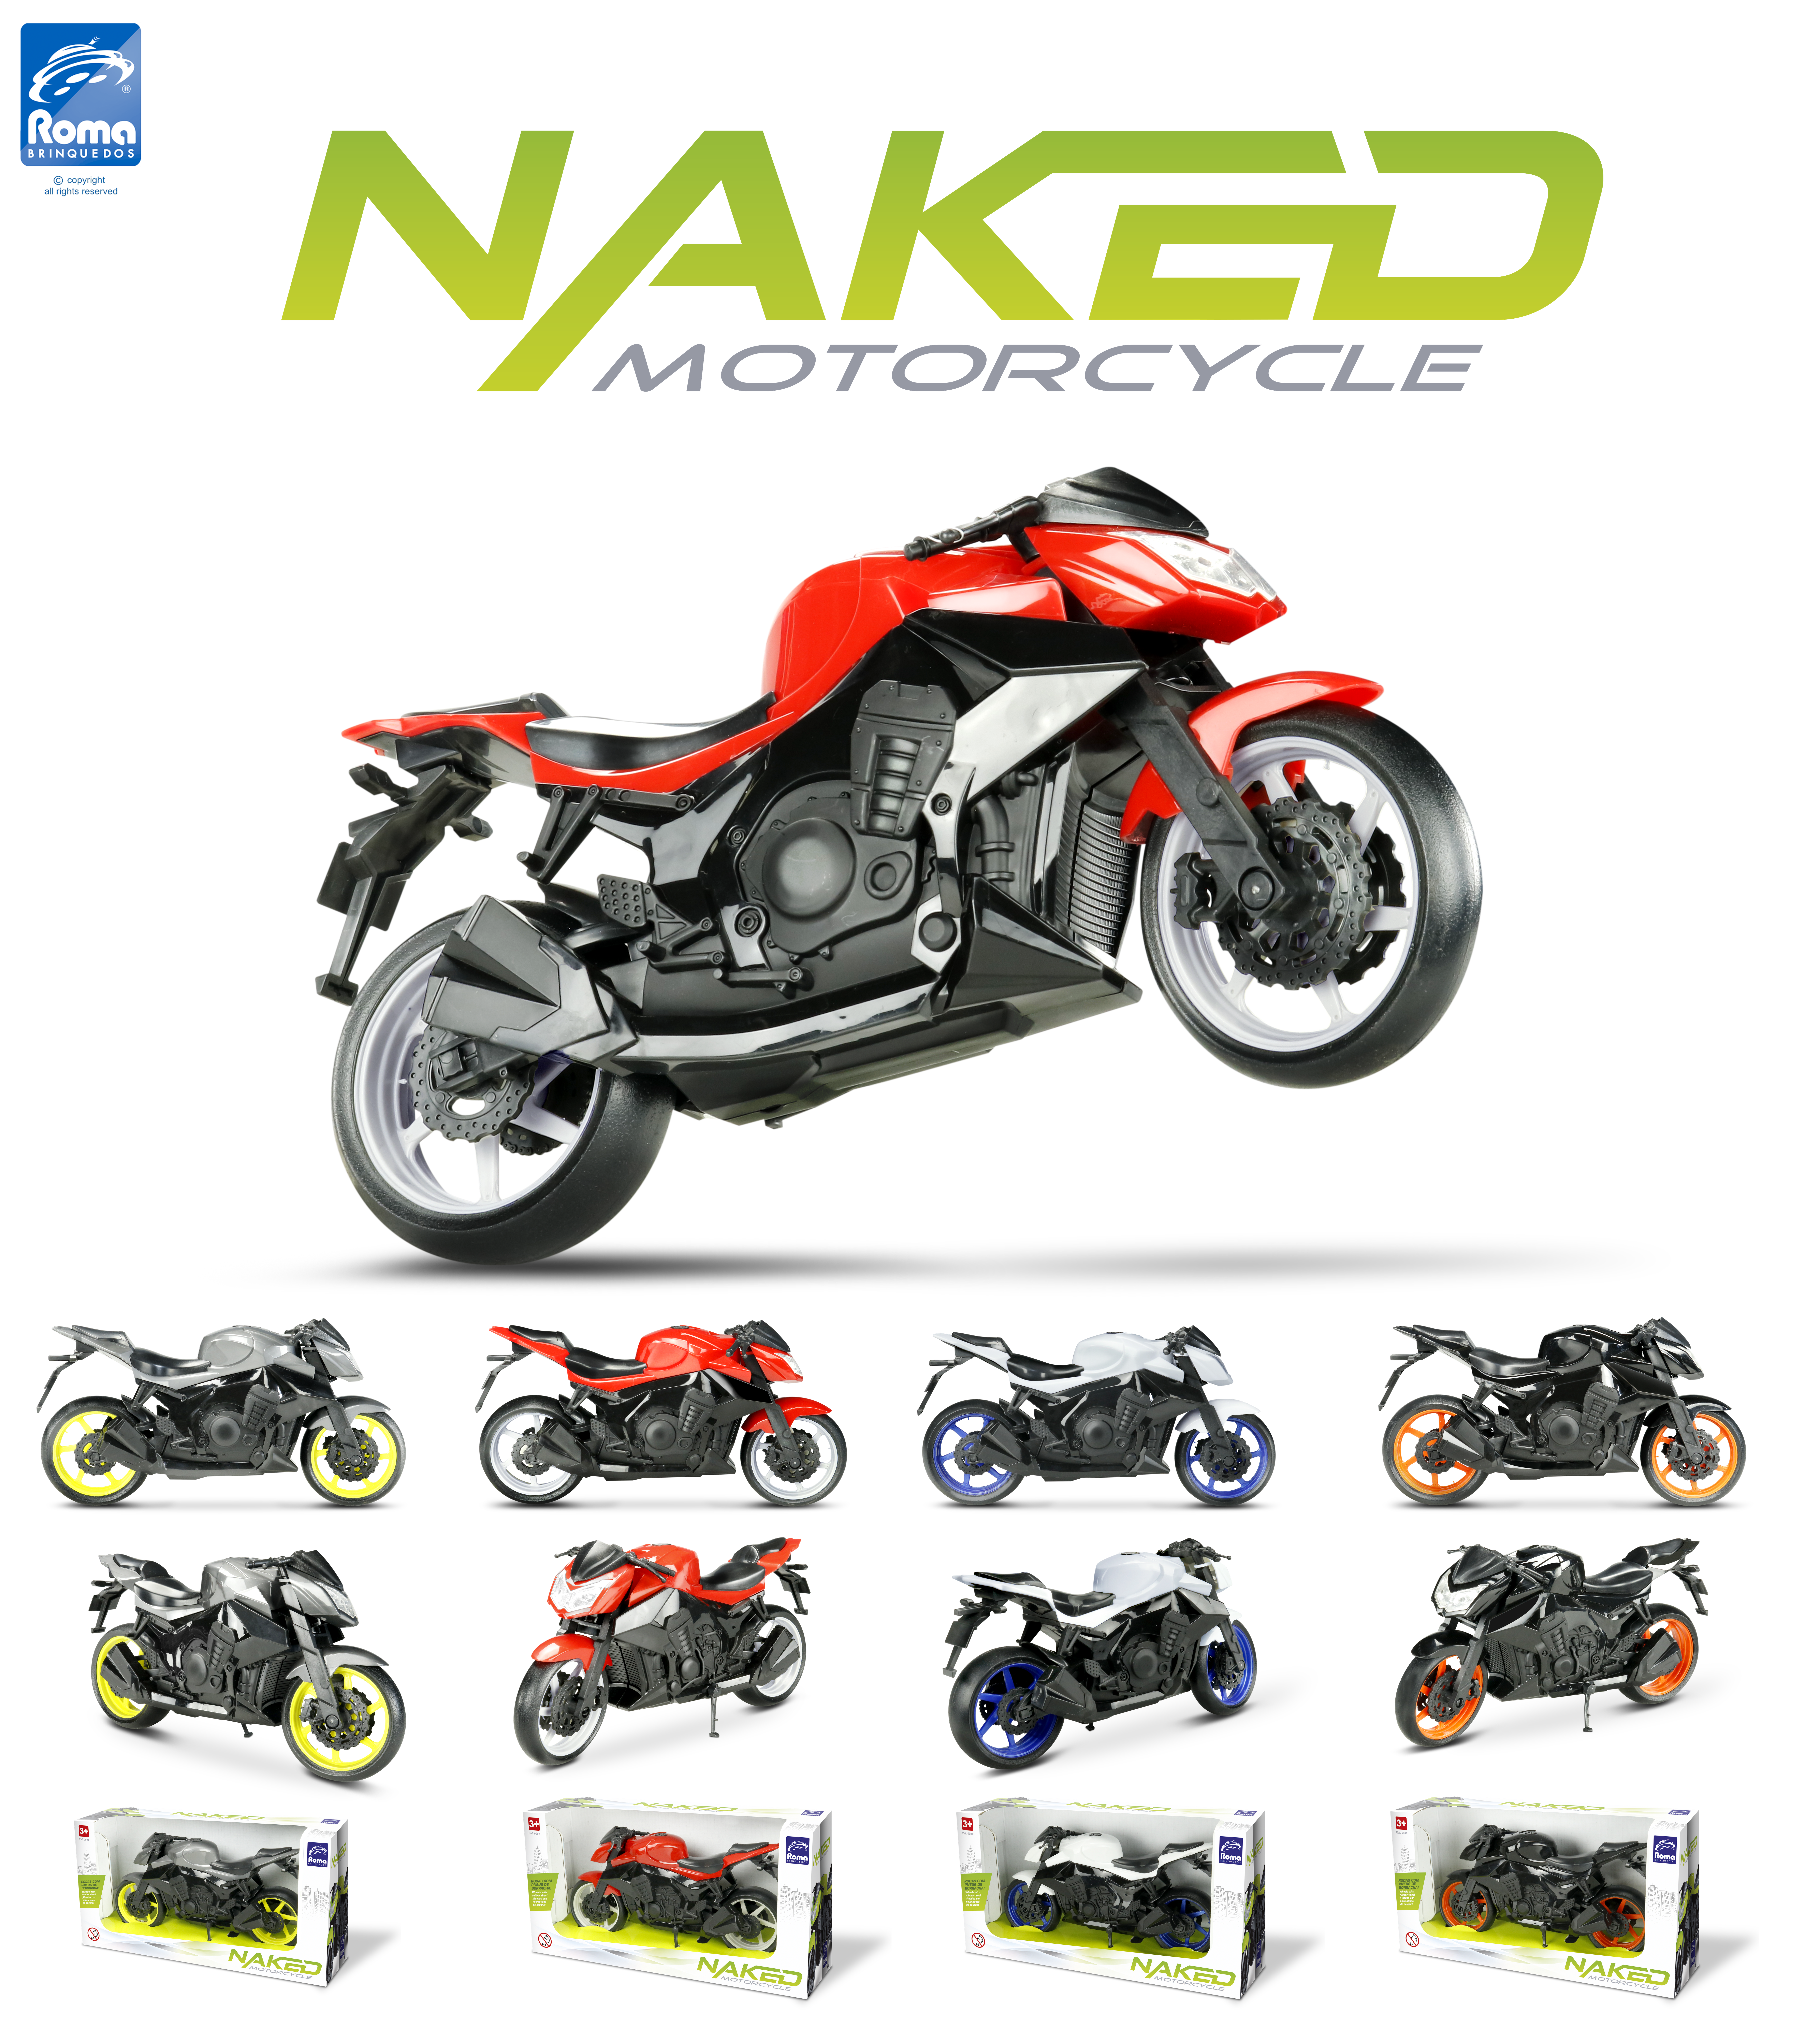 0901 - Roma Naked Motorcycle.png